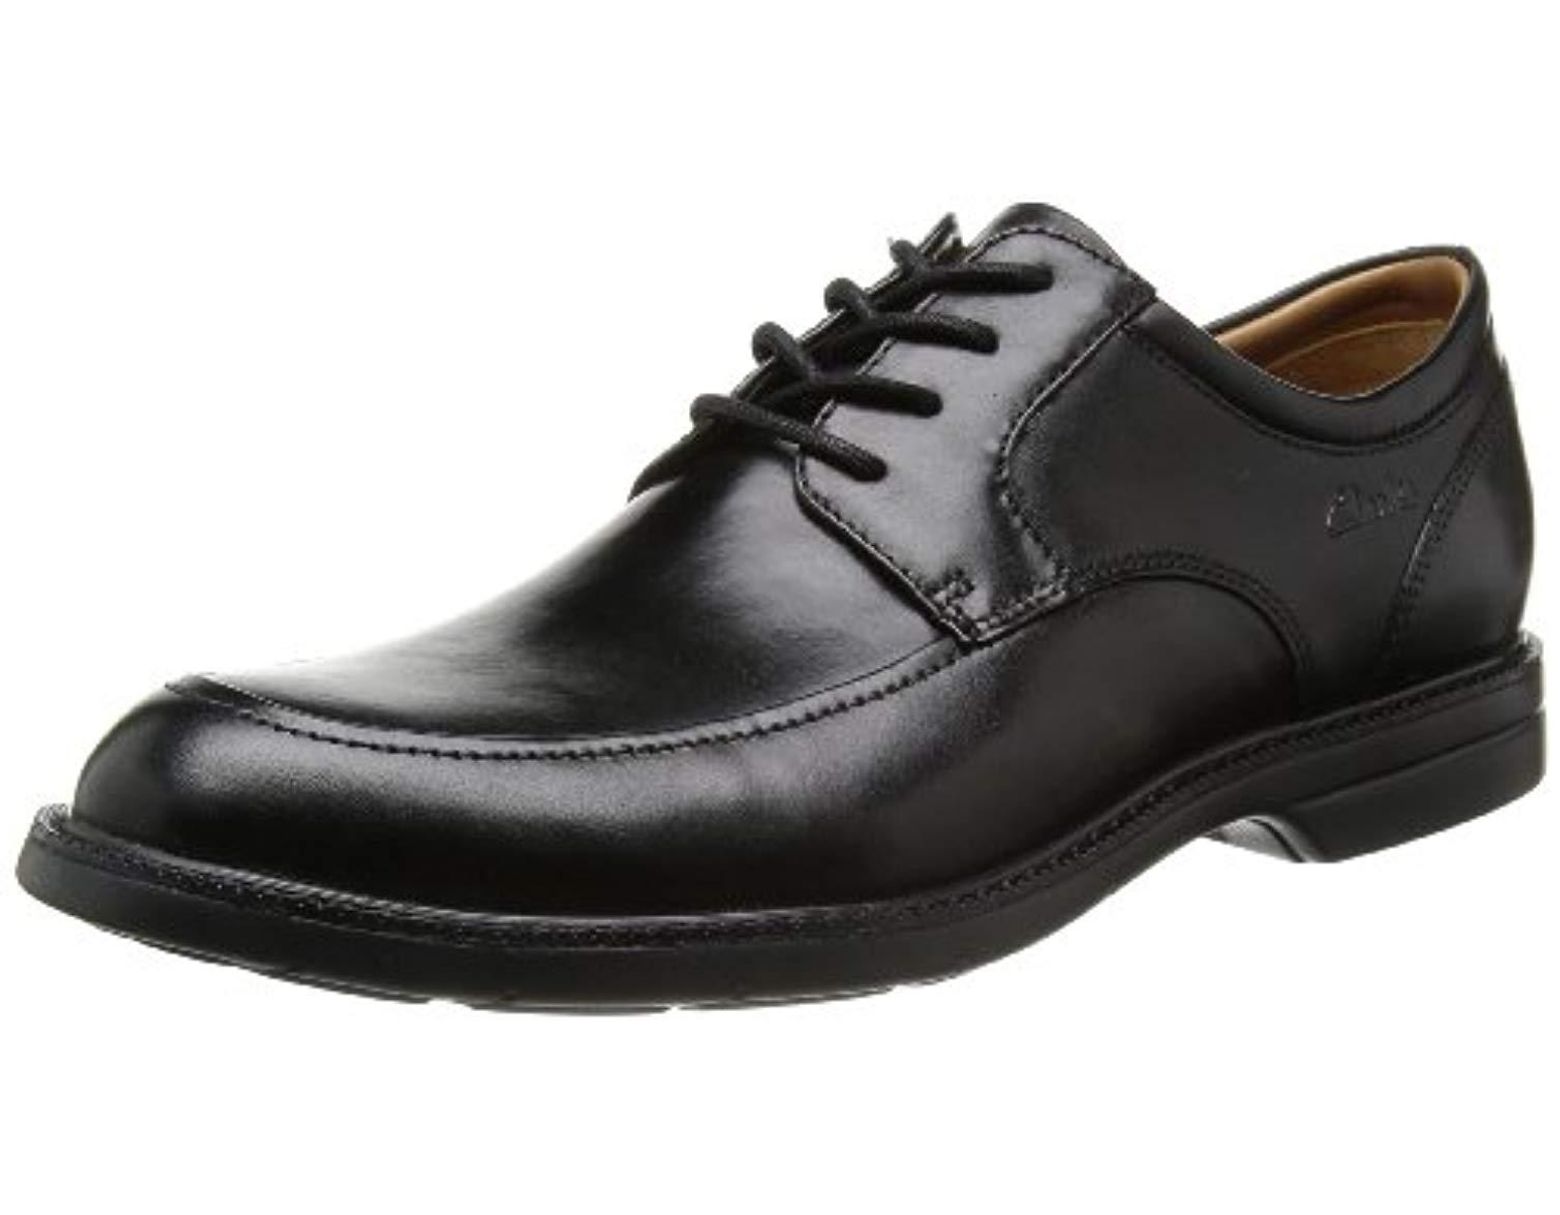 MENS CLARKS LEATHER SMART FORMAL CLASSIC DRESS LACE UP SHOES AMIESON WALK SIZE